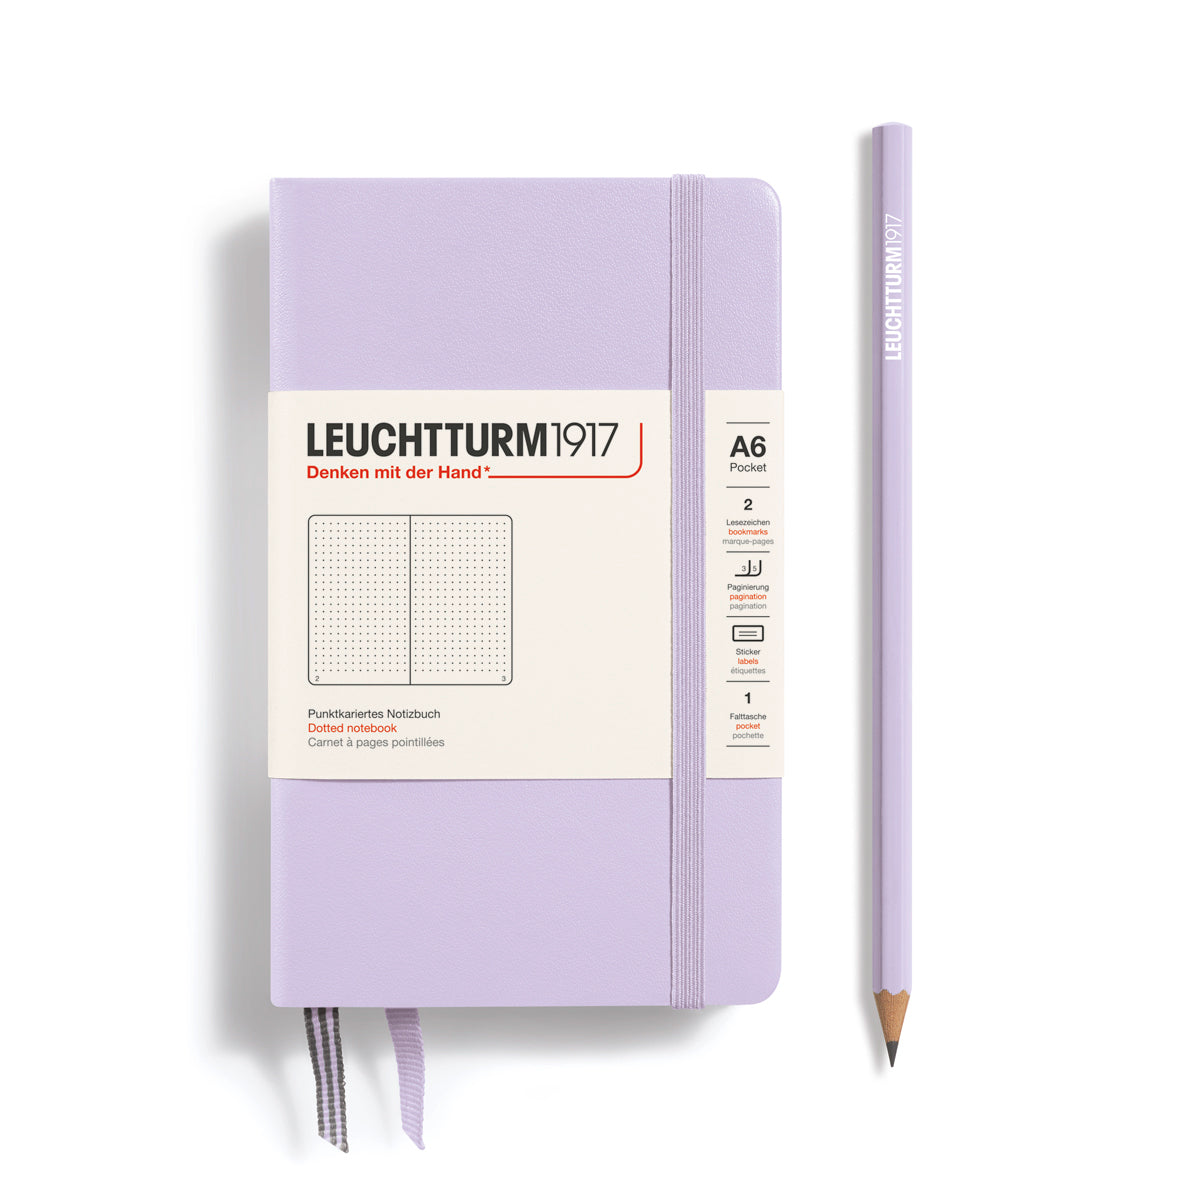 Leuchtturm1917 Notebook A6 Pocket Hardcover in lilac and dotted ruling from penny black